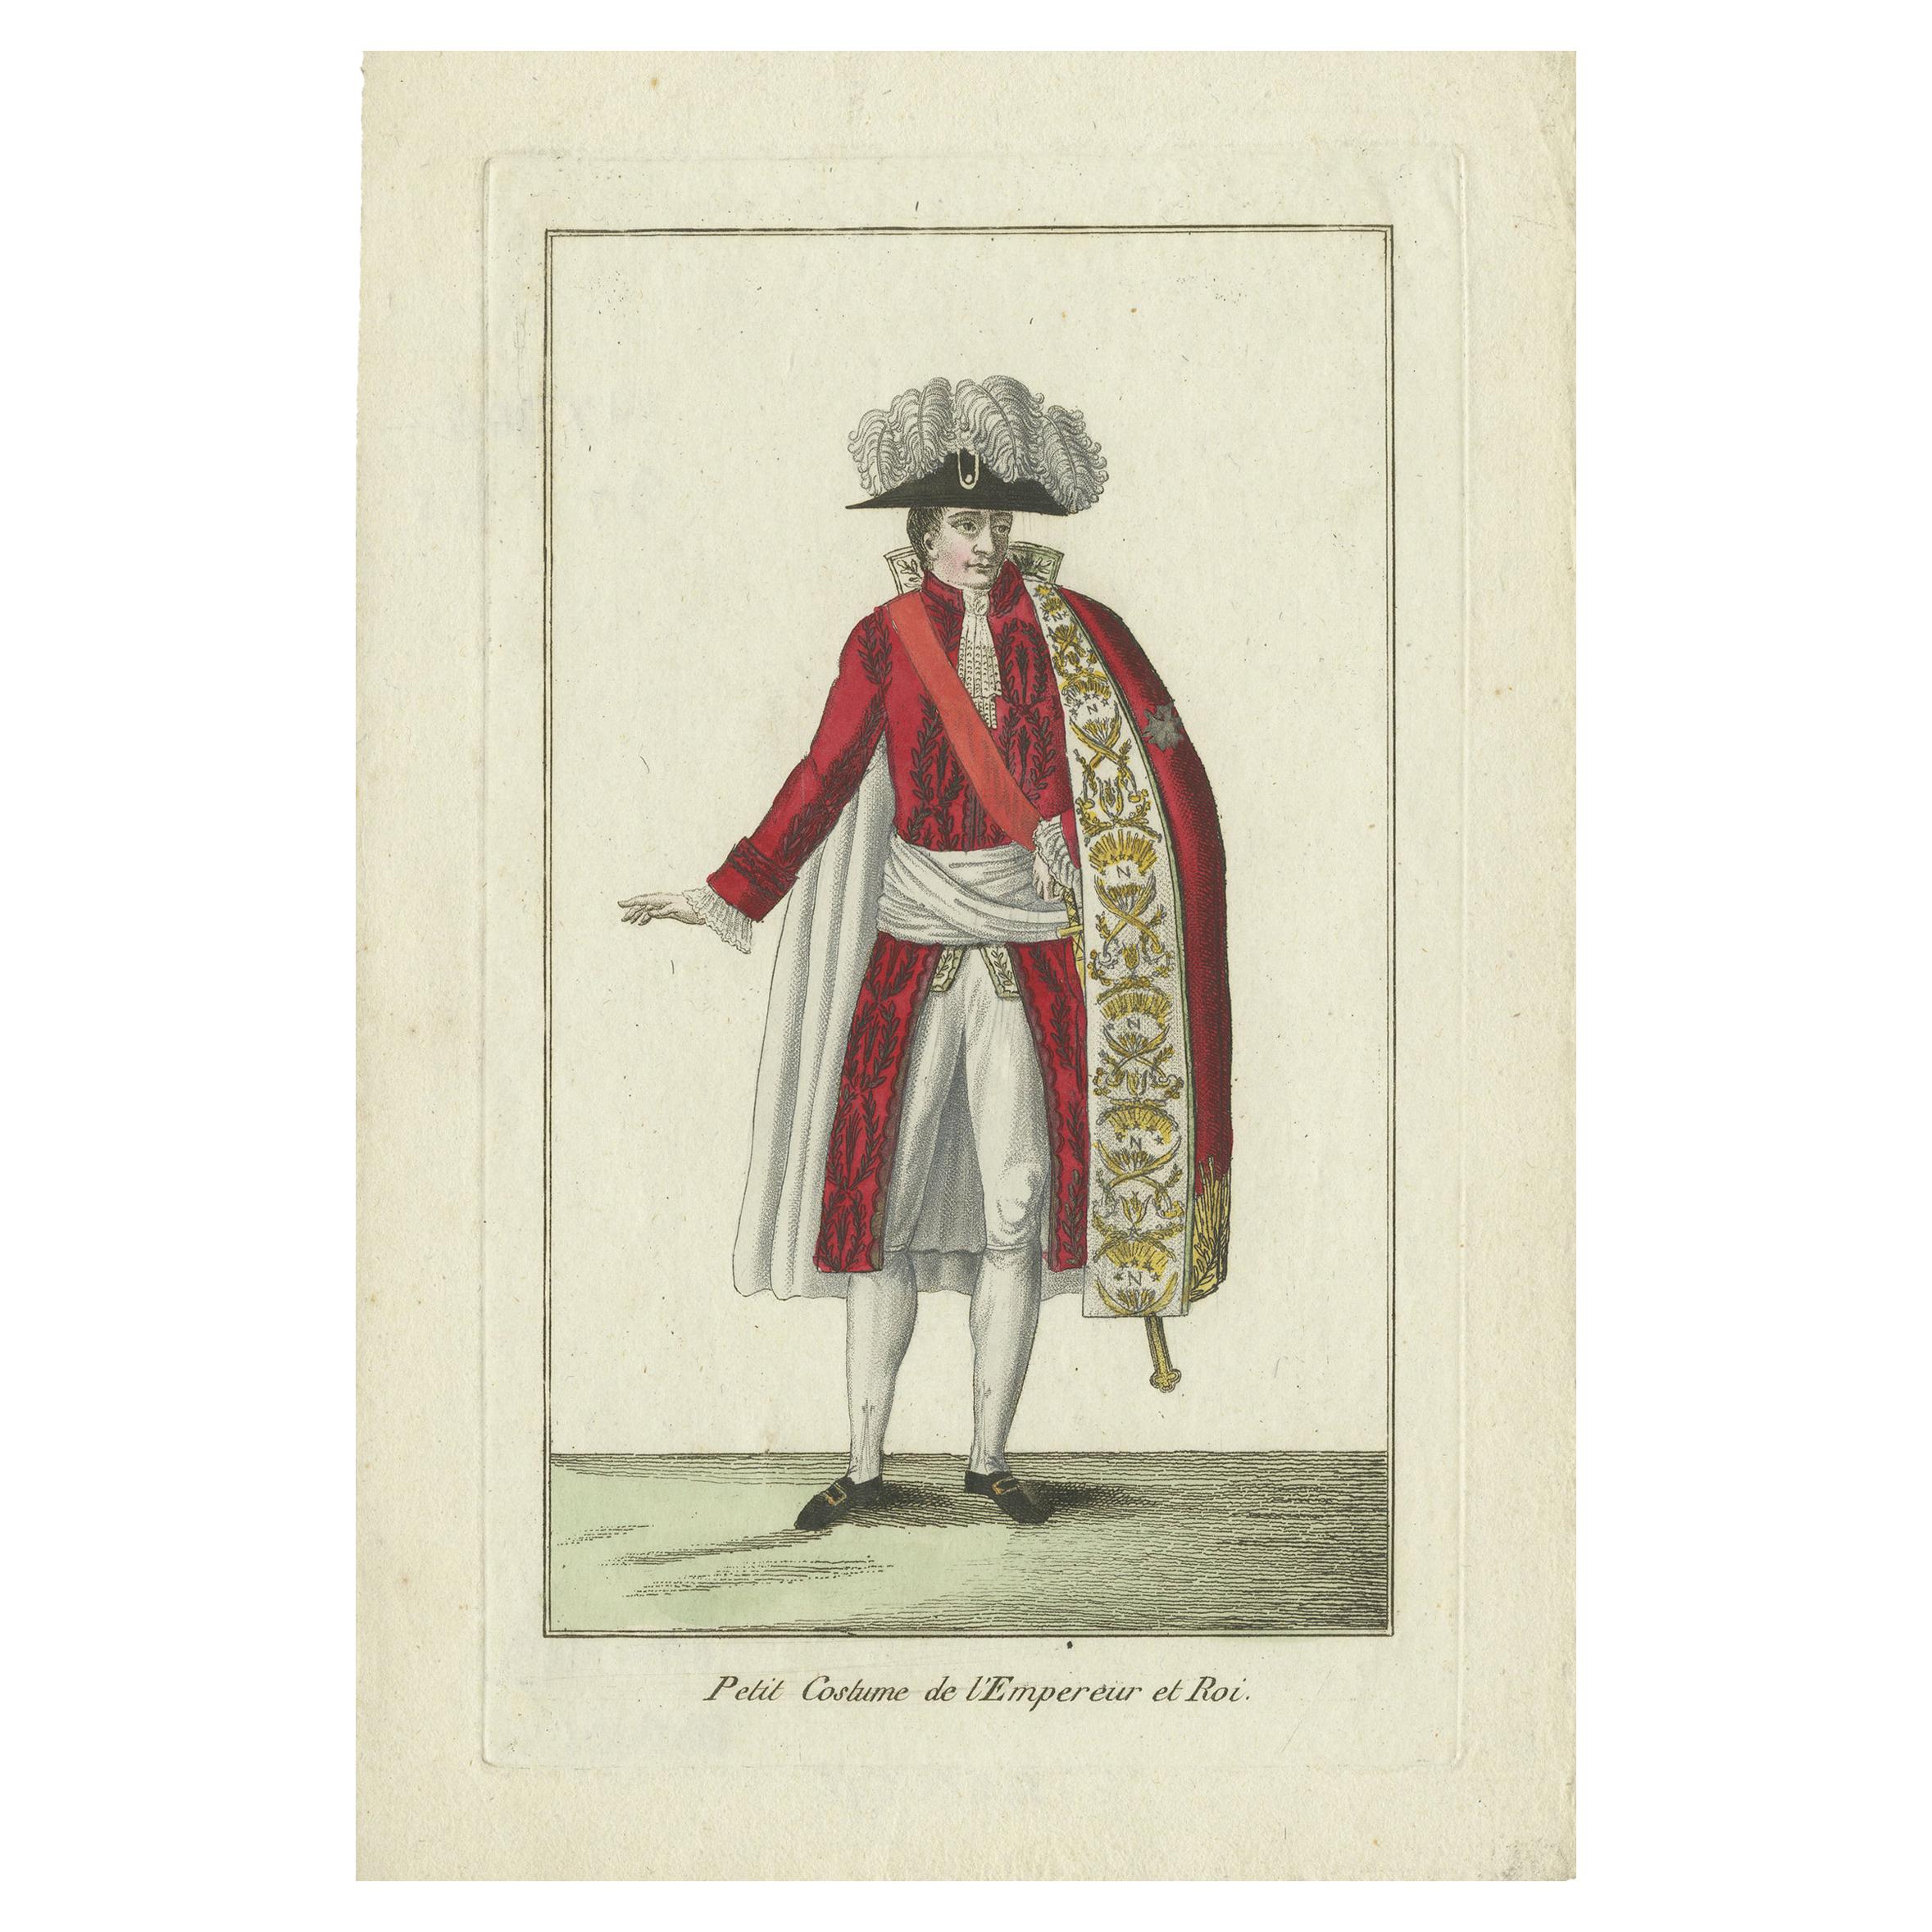 Antique Costume Print of the Emperor and King of France, circa 1810